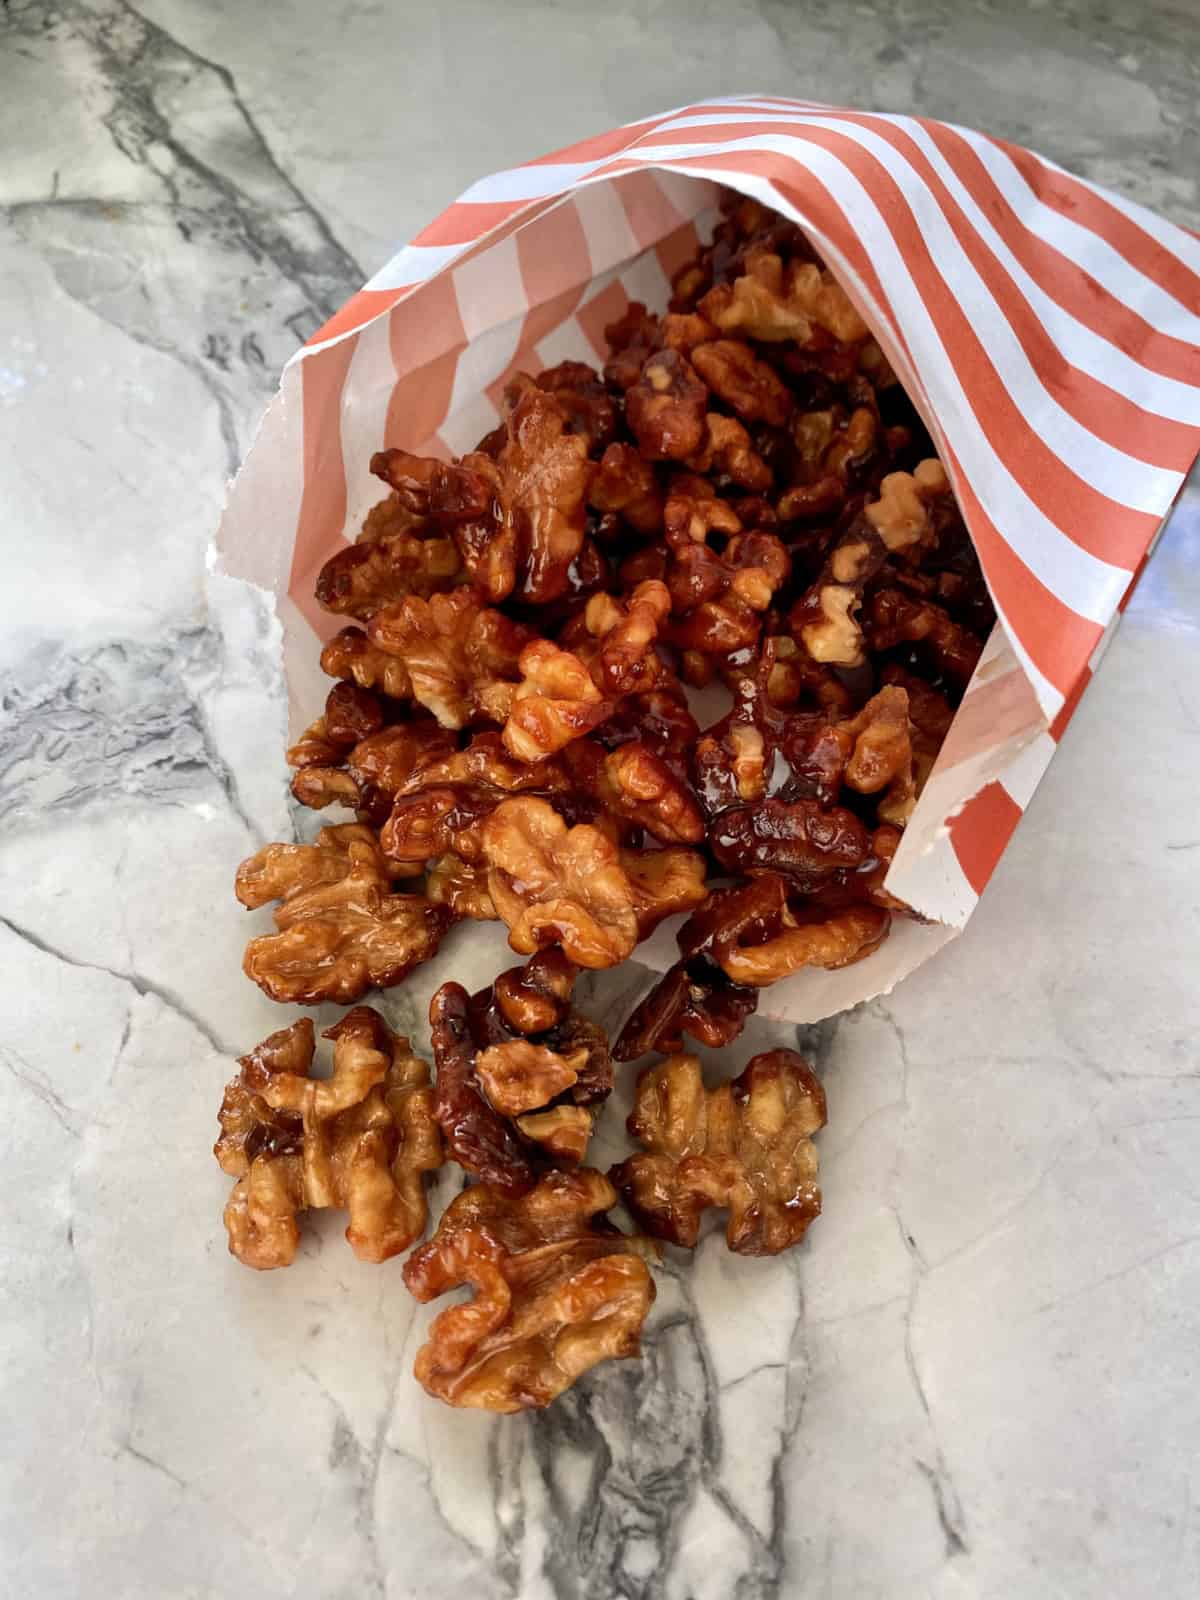 White and orange paper bag filled with candied walnuts.